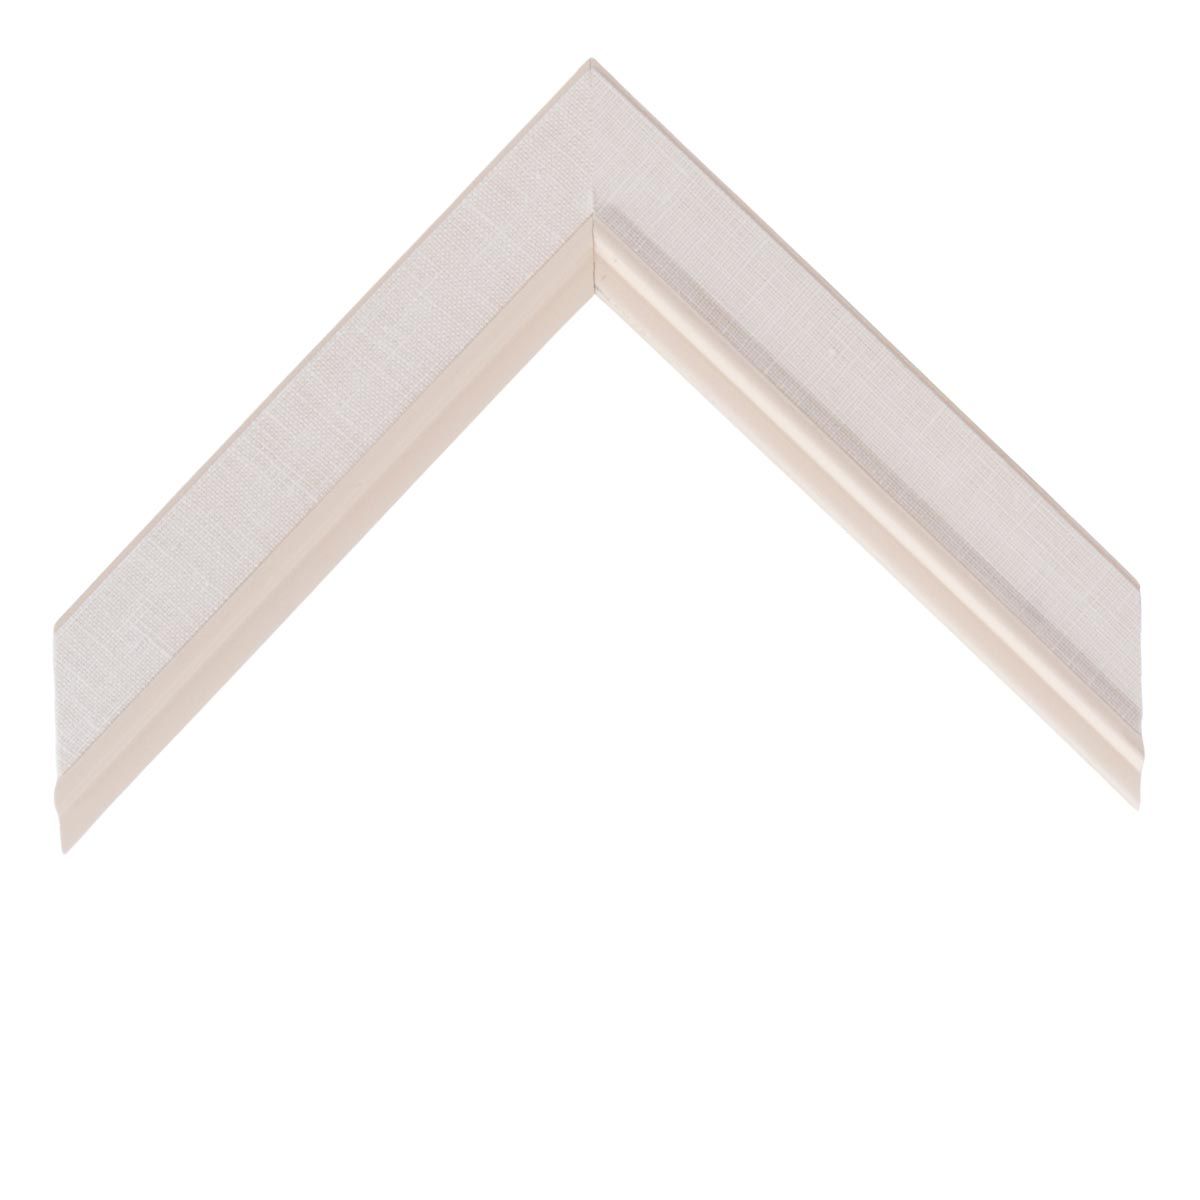 Linen Liner Moulding - Natural, White Bead ML120-1-¼, 14 x 18 inches